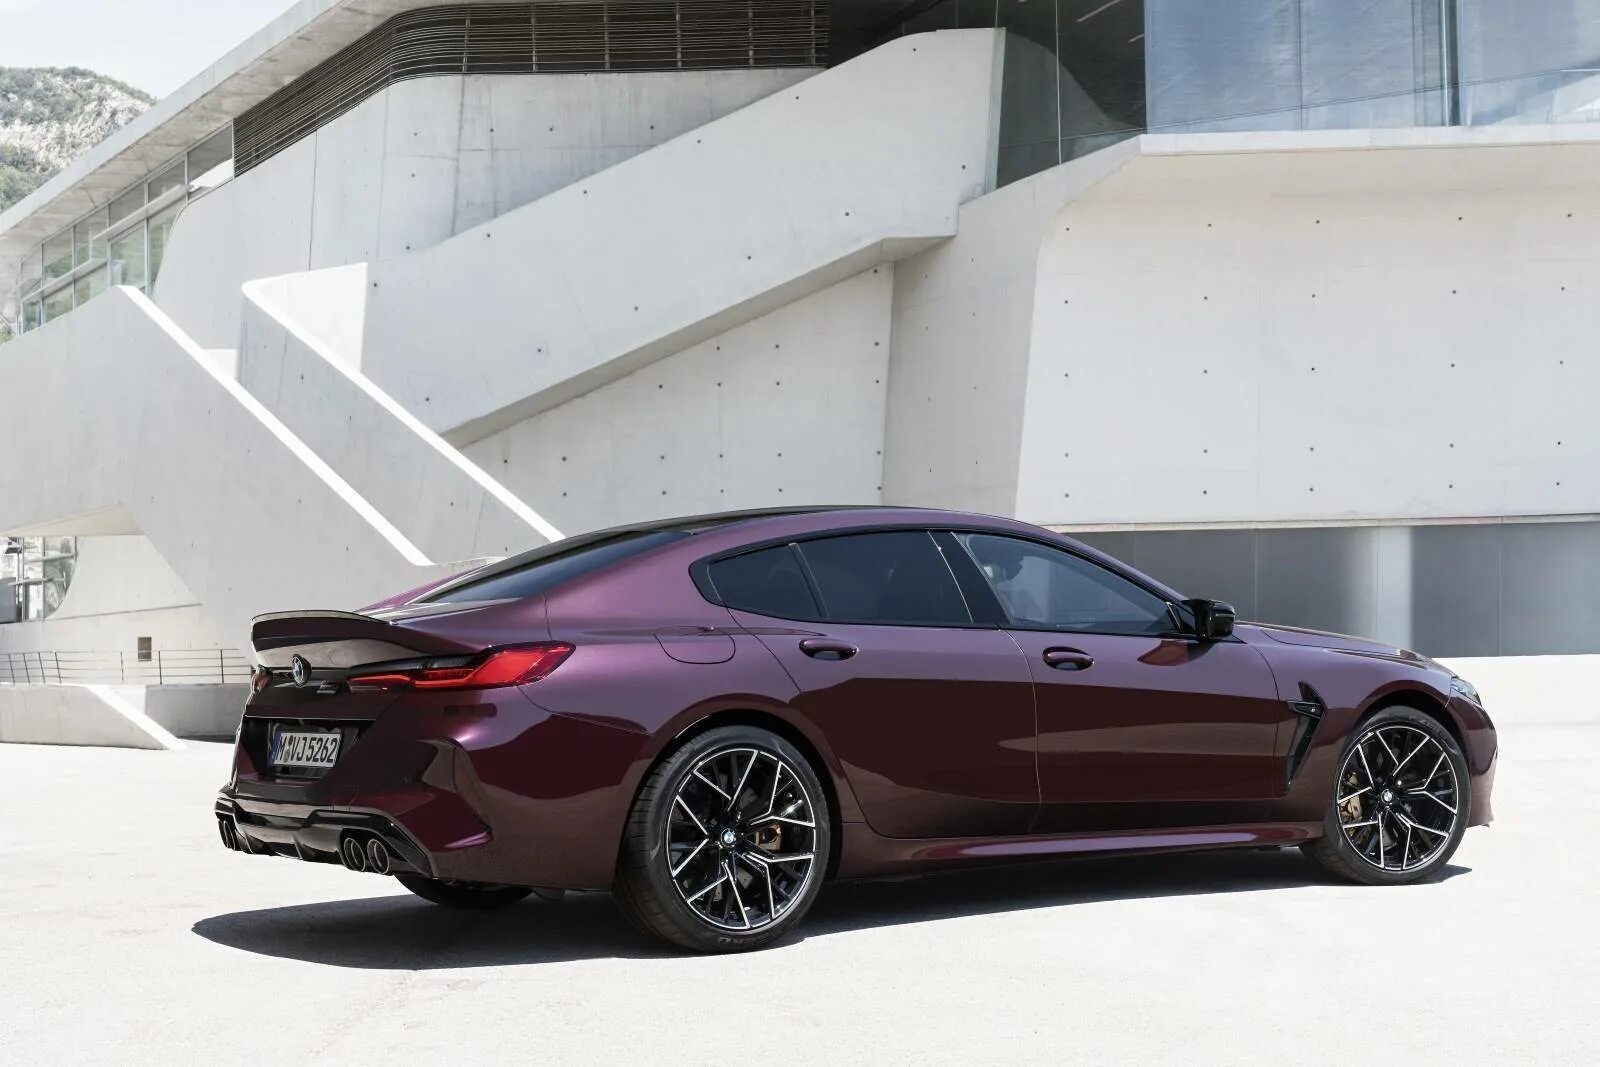 BMW m8 Coupe 2020. BMW m8 Competition Coupe 2020. BMW m8 Gran Coupe Competition 2020. BMW m8 Gran Coupe 2020.